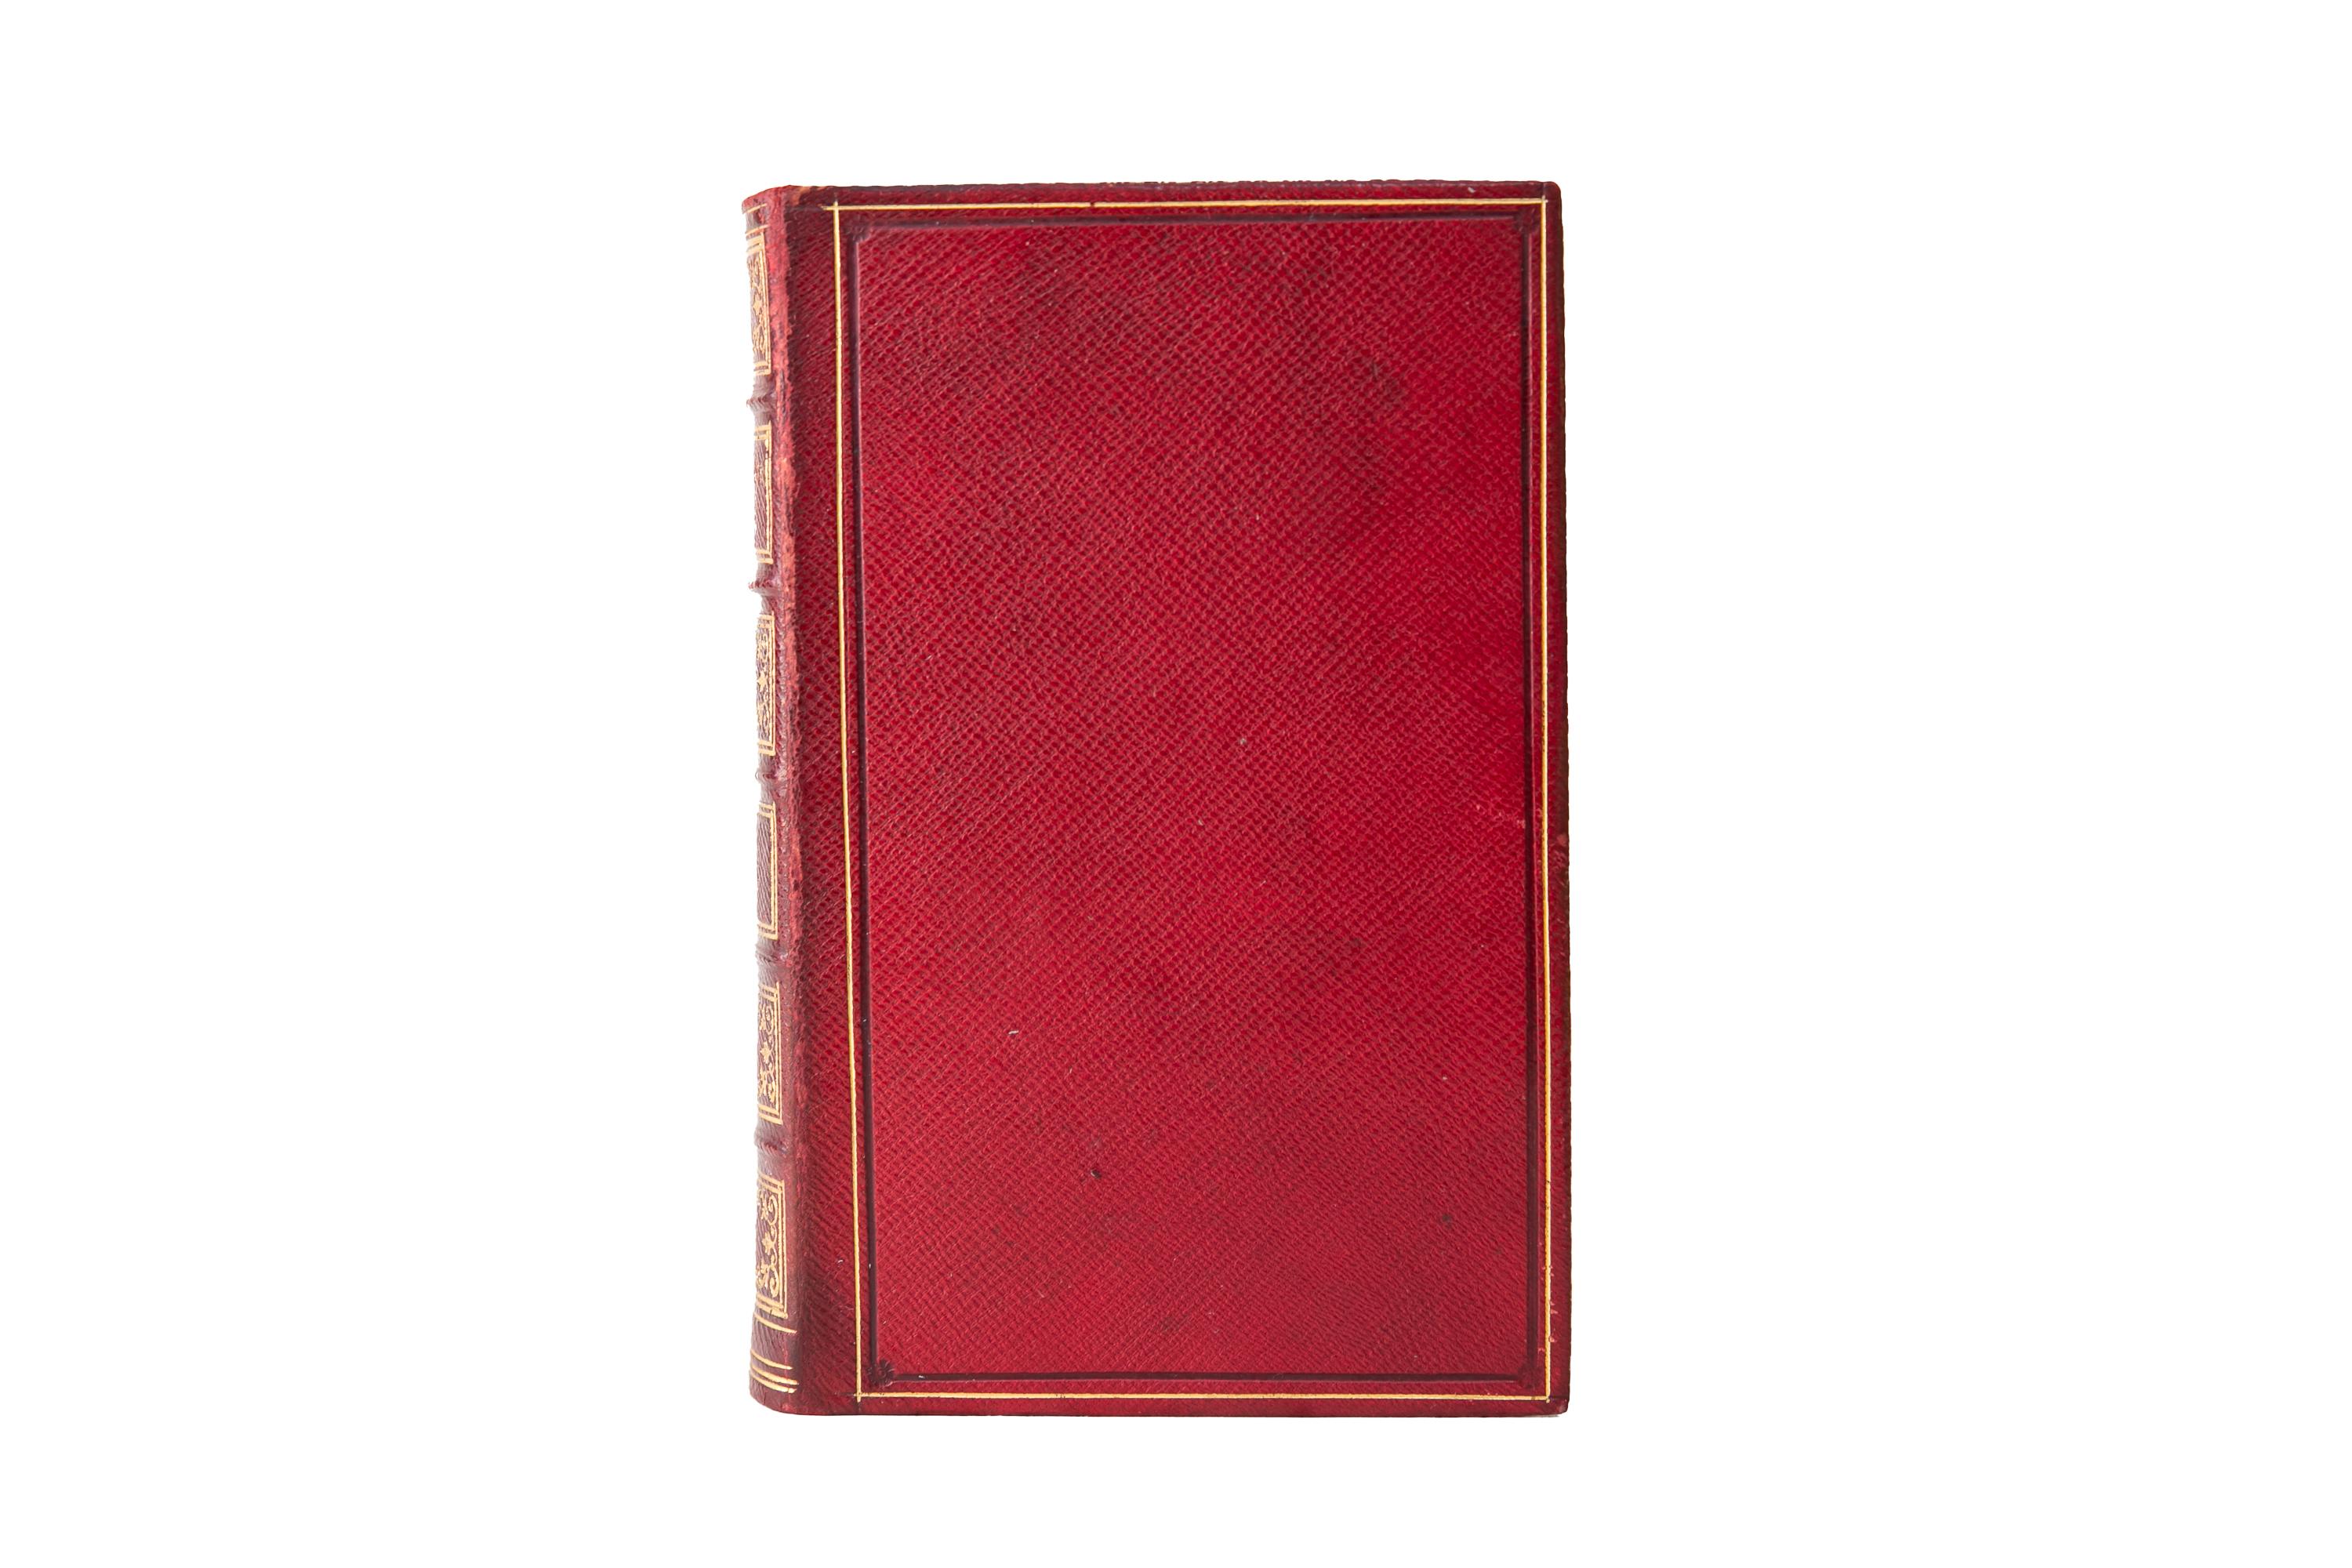 2 Volumes. Elizabeth Barrett Browning, The Poems. Bound in full red morocco with the covers and raised band spines gilt-tooled. All edges gilt. New York: C.S. Francis & Co., 1853.